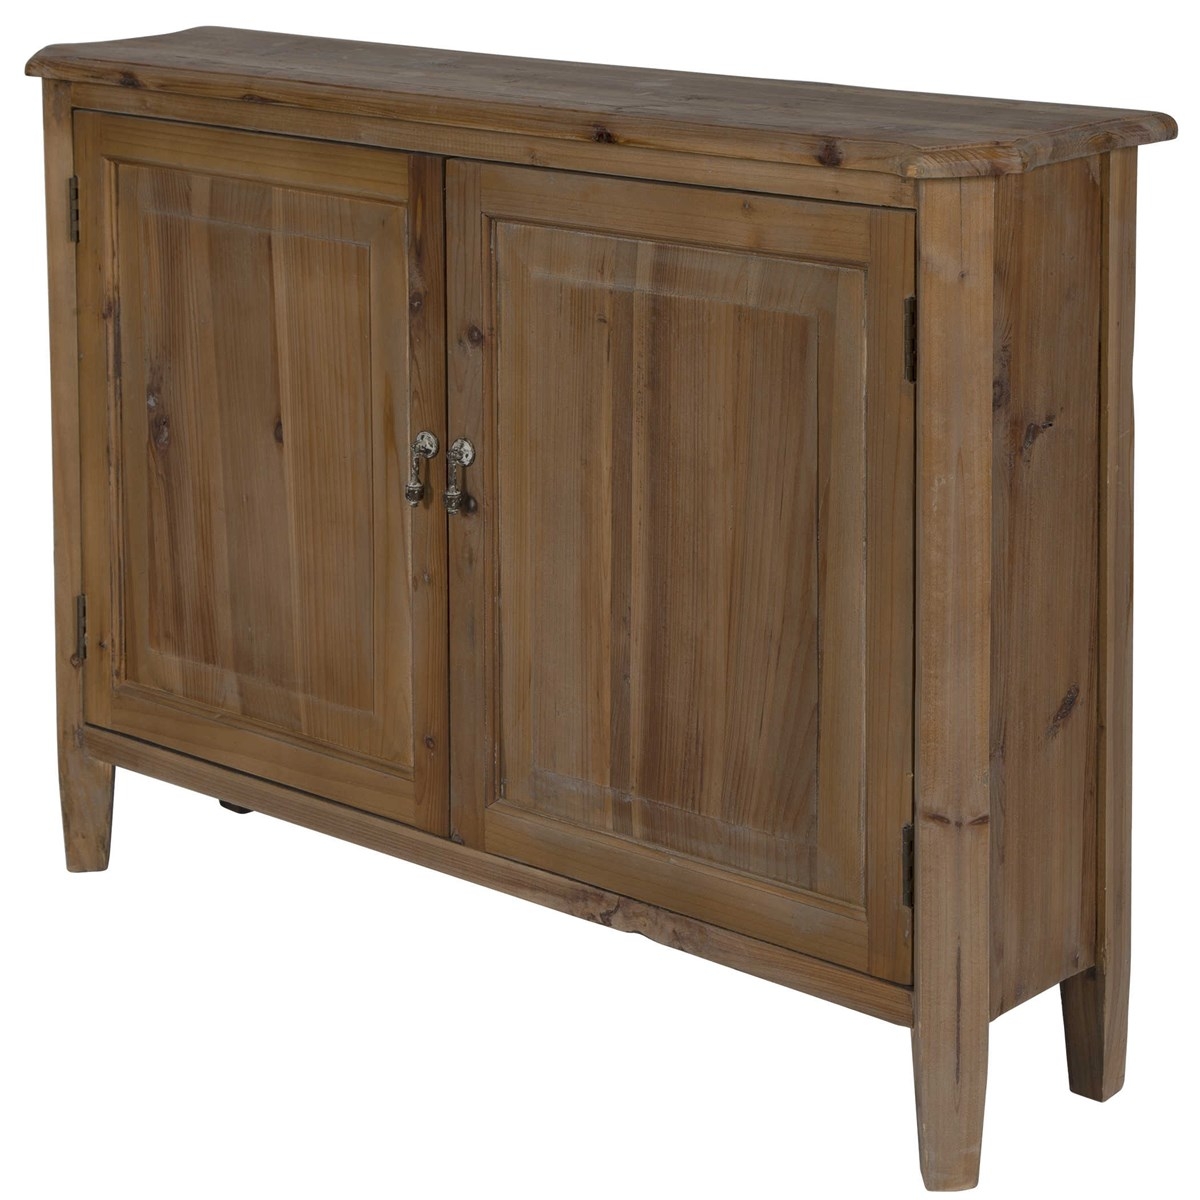 Altair Reclaimed Wood Console Cabinet - Image 1